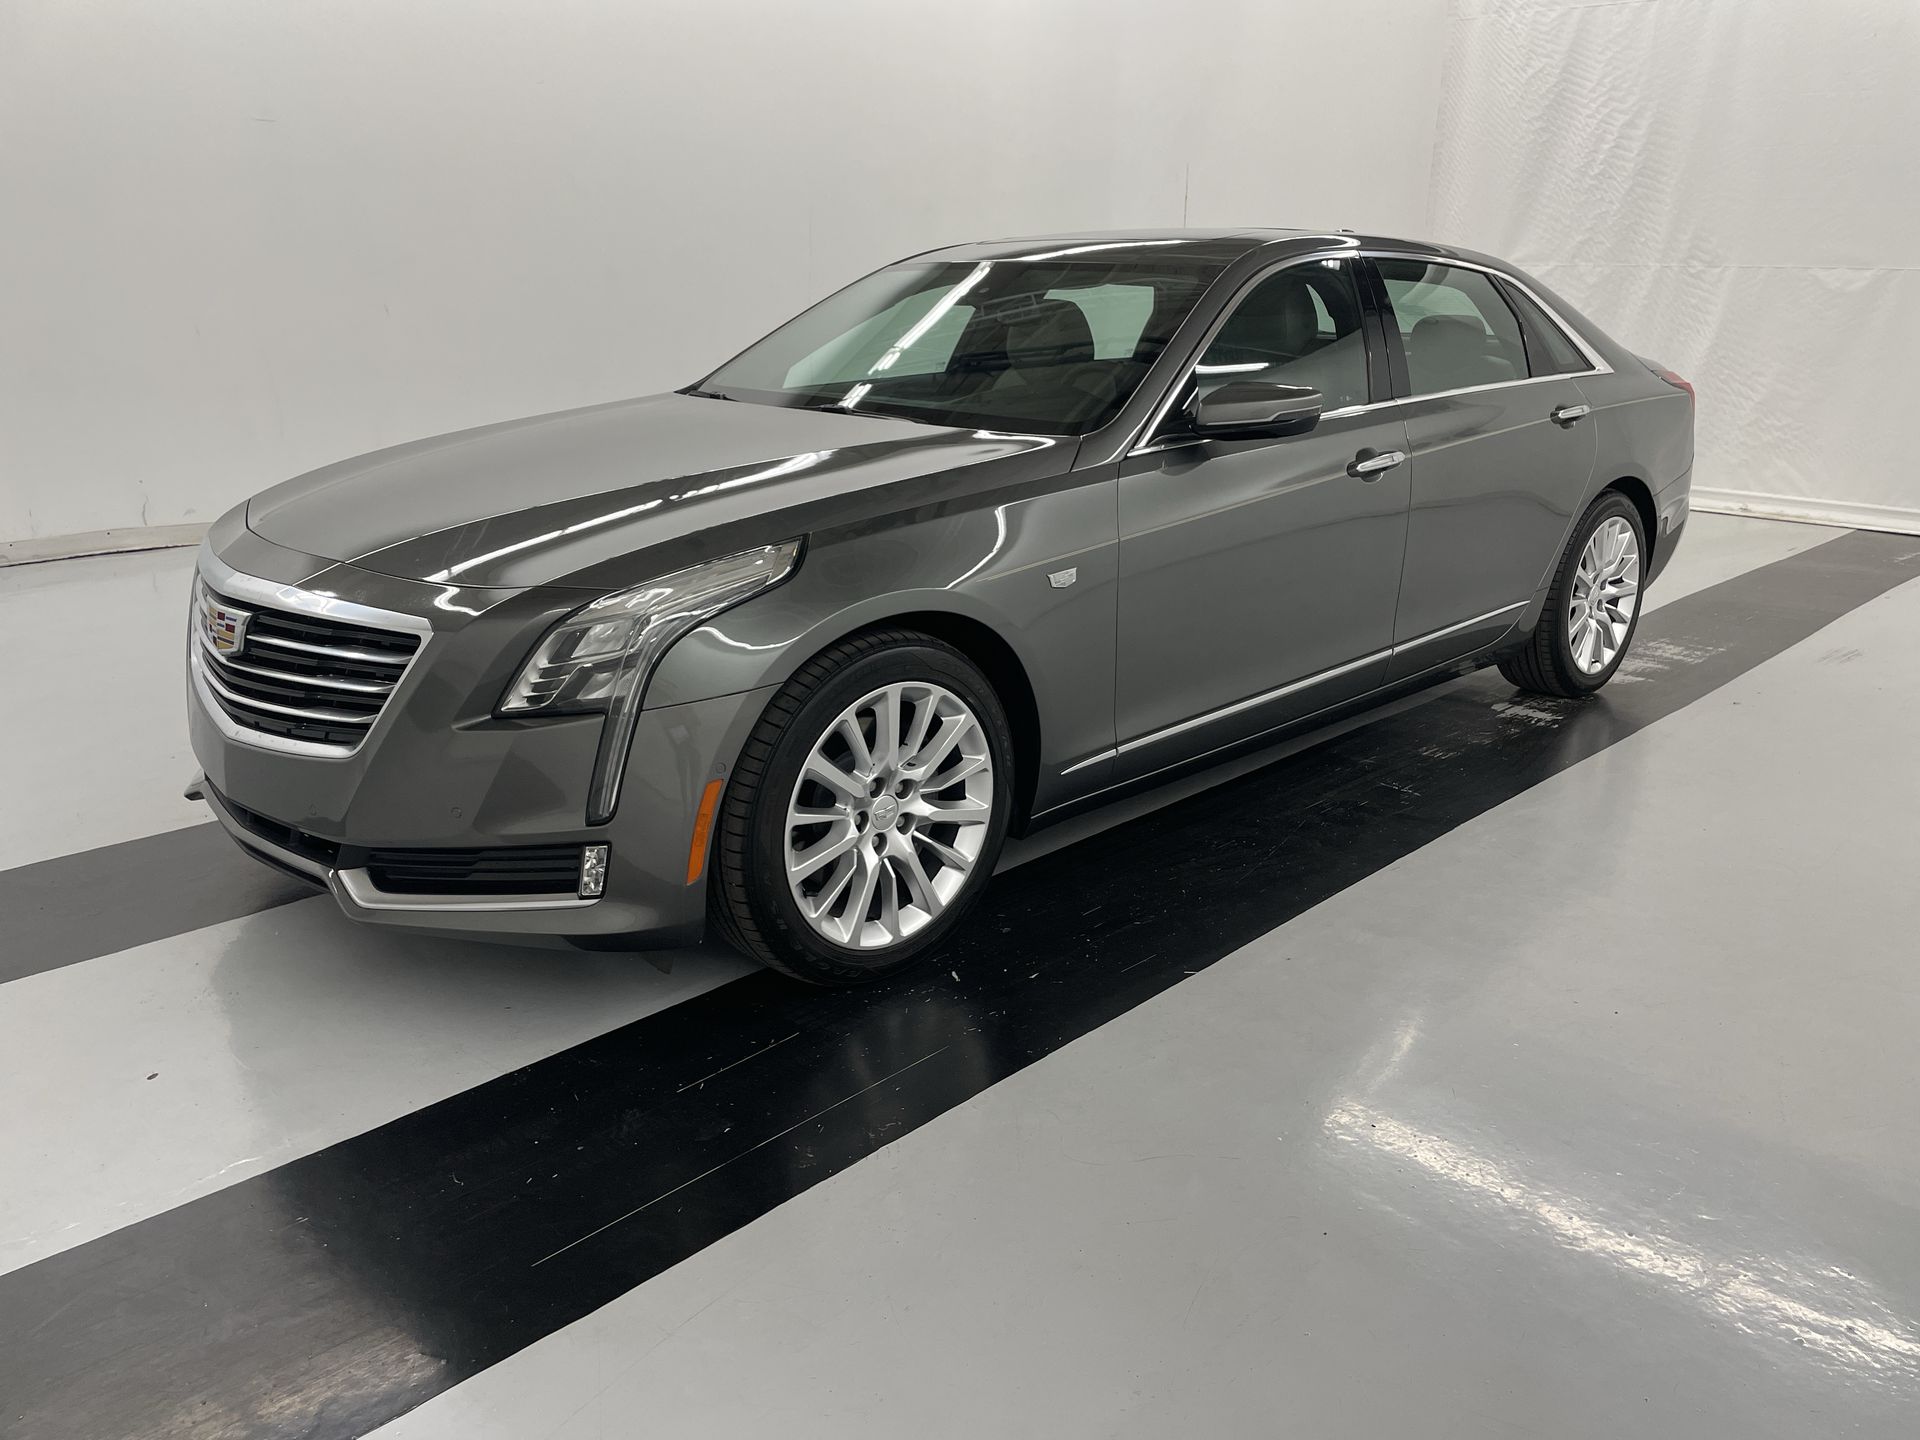 Used 2017 Cadillac CT6 For Sale ($31,999) | Vroom